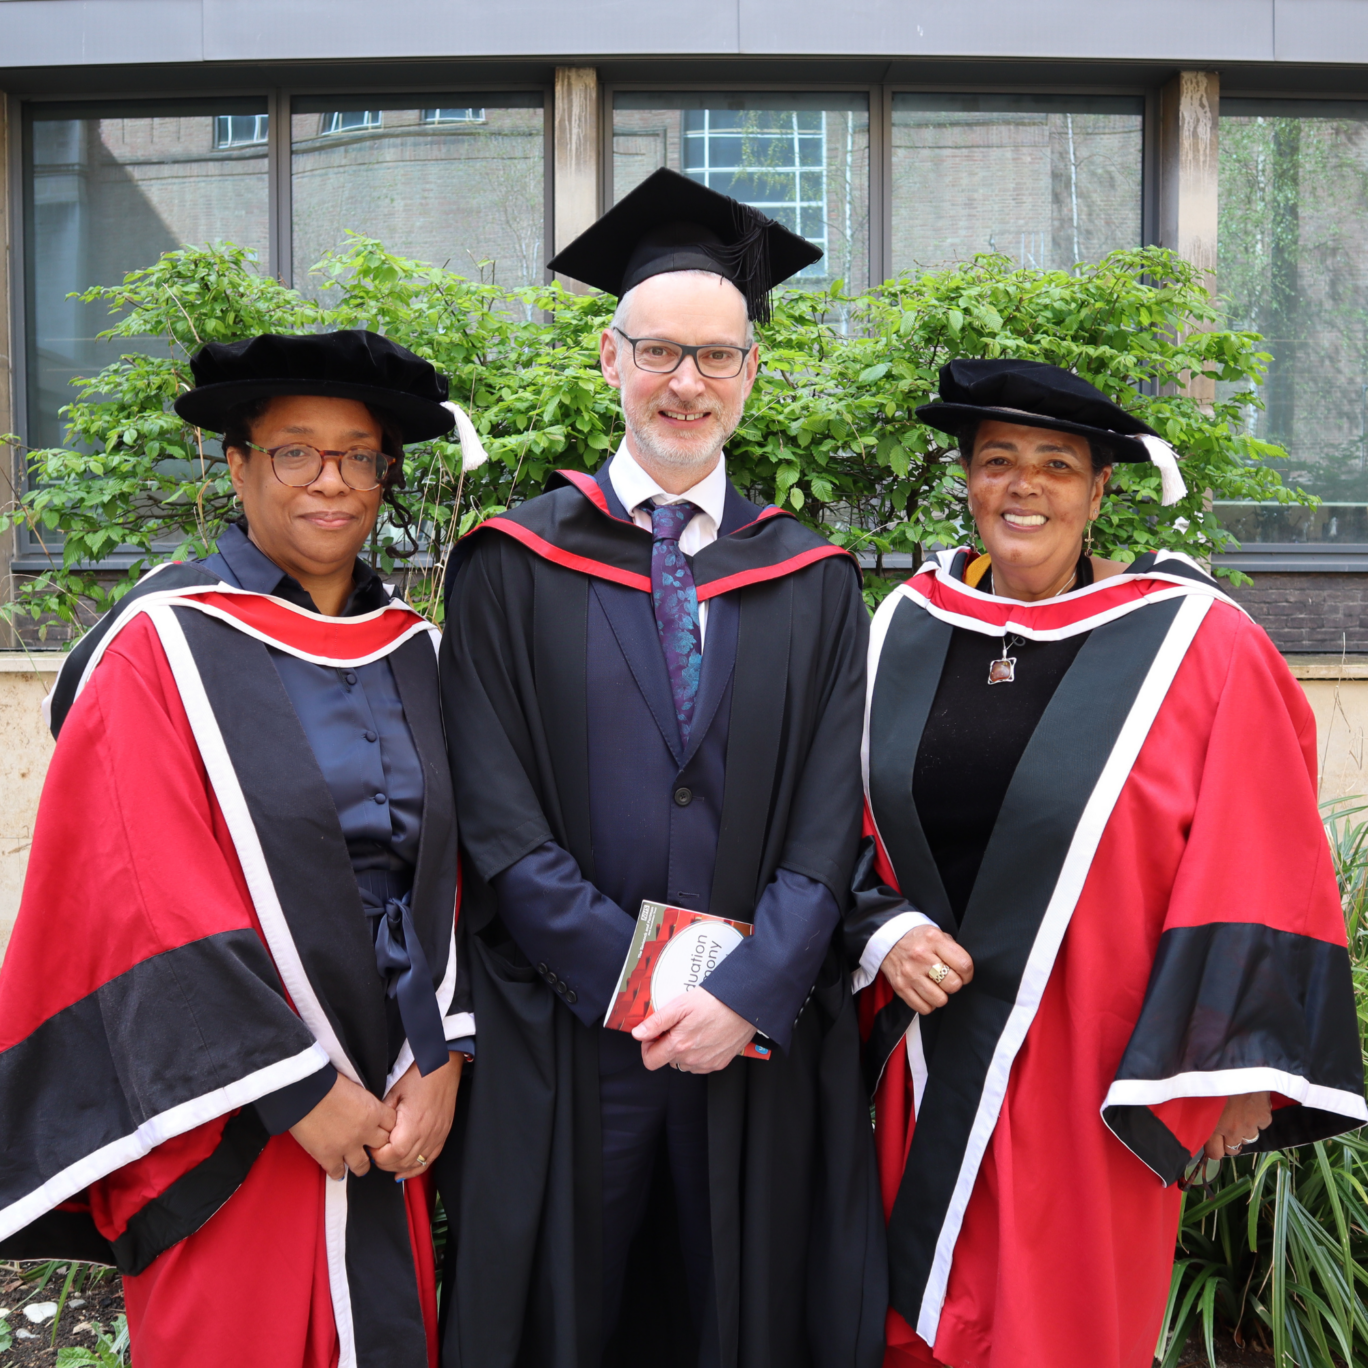 Graduation 24 - Michael Holland and Honorary Doctorate Recipients